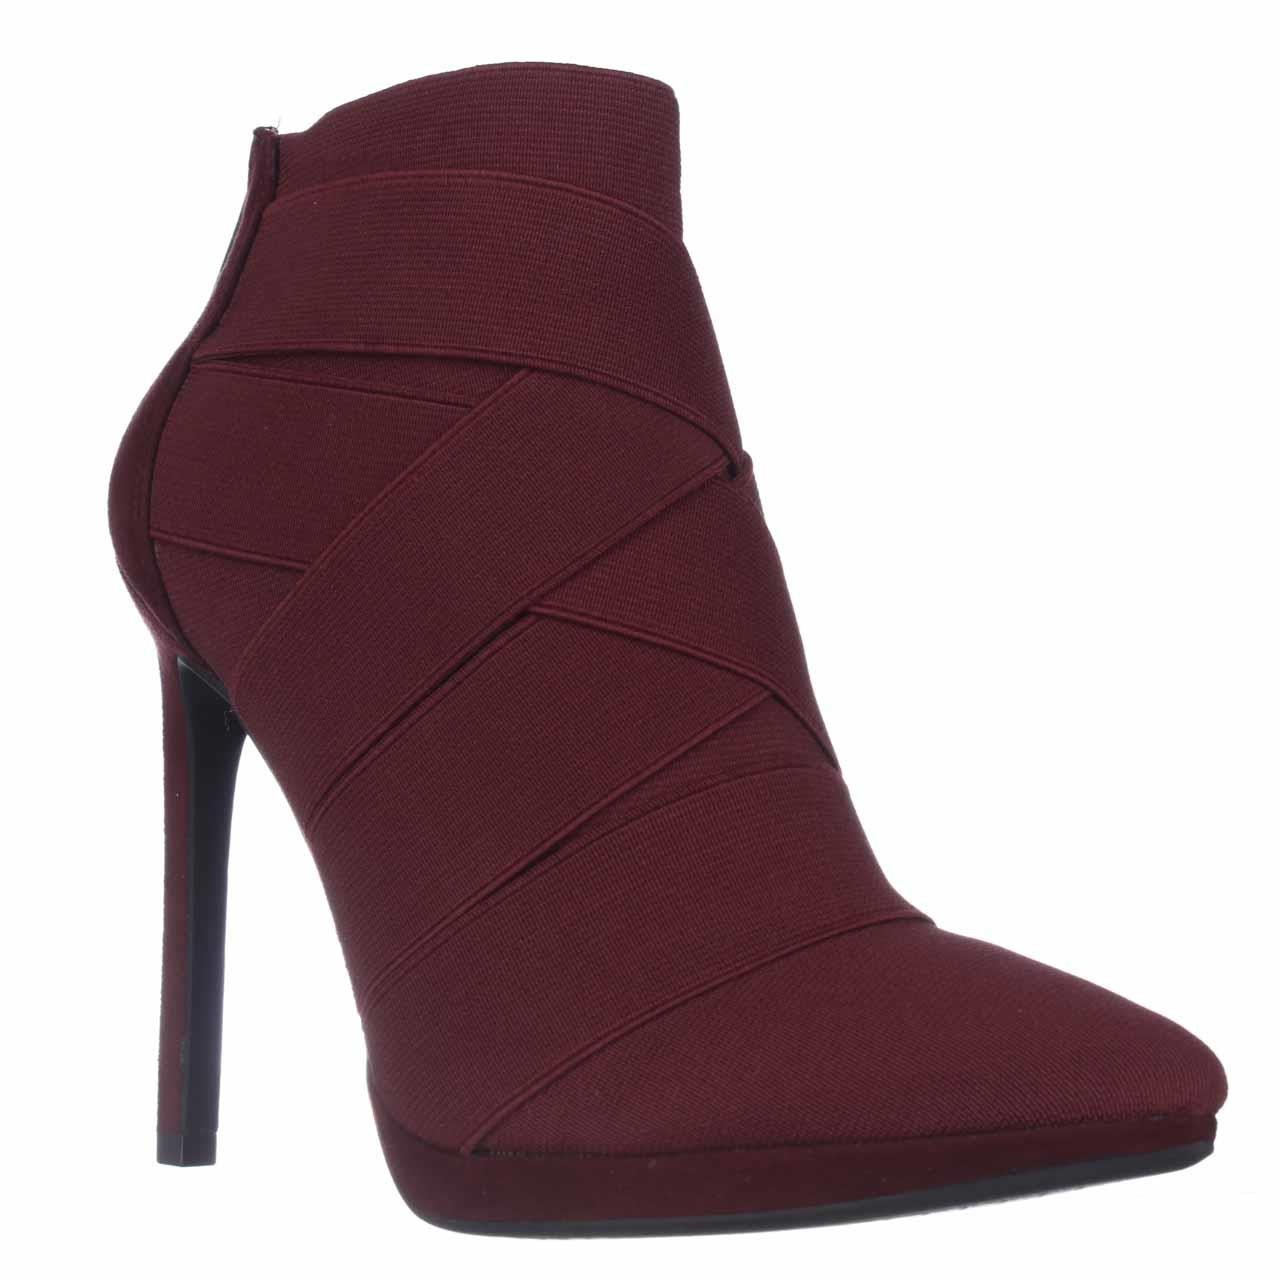 Jessica Simpson Breena Elastic Wrap Dress Ankle Boots in Red - Lyst